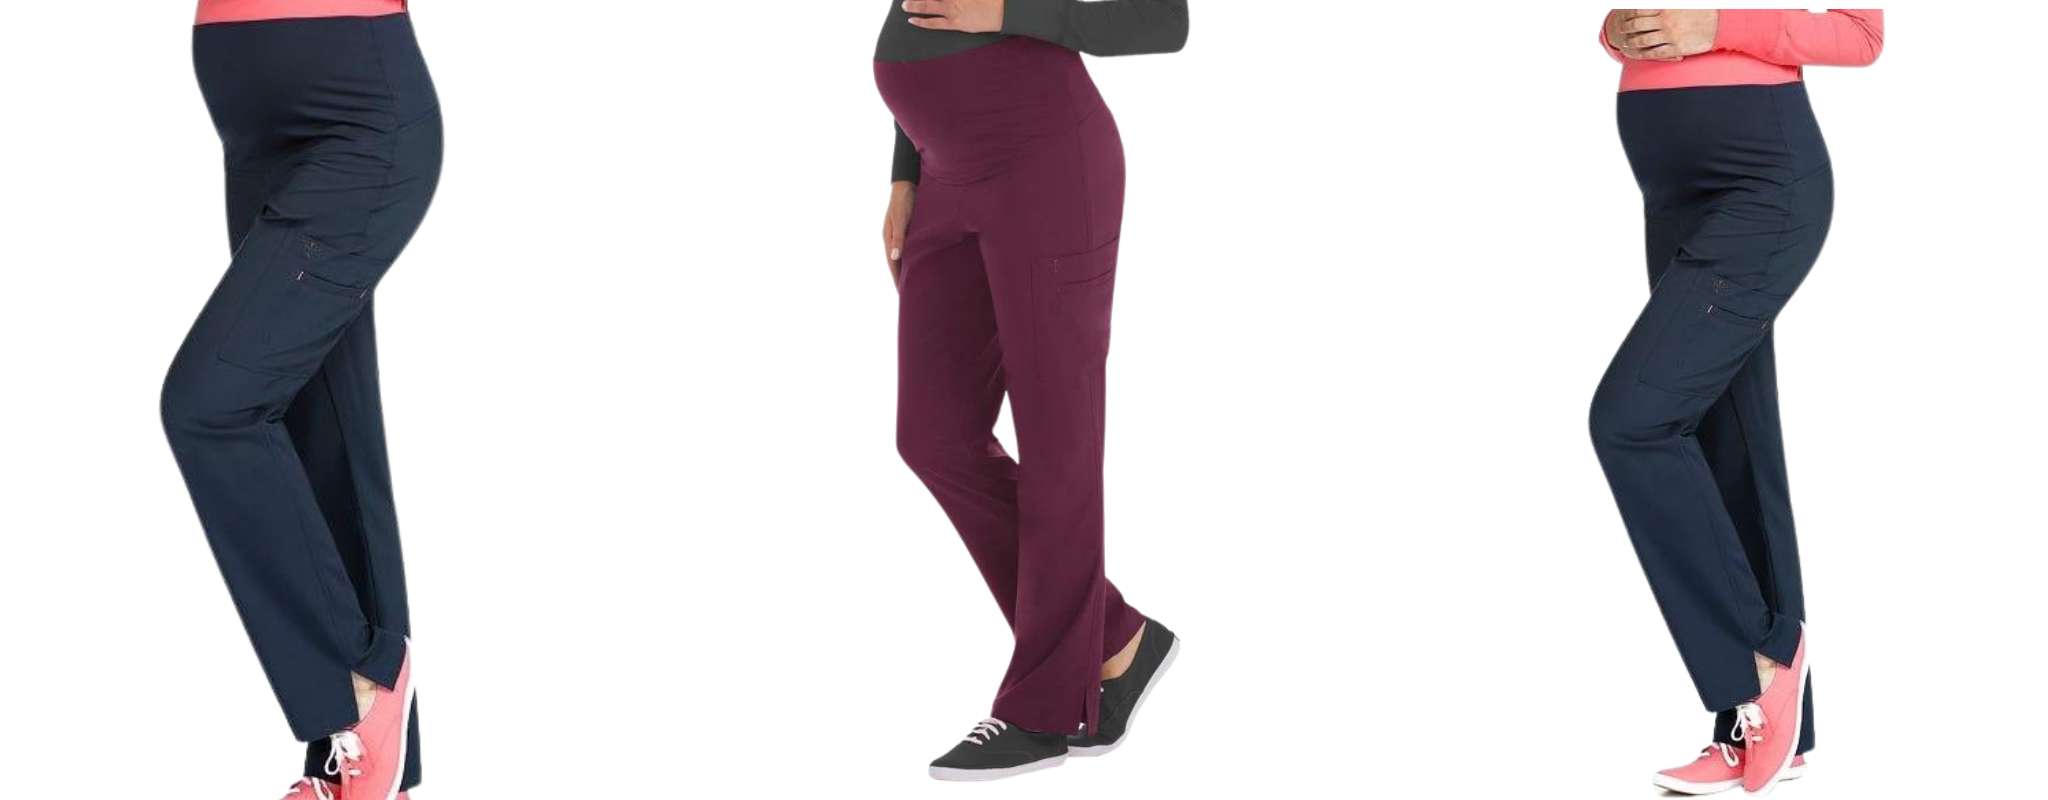 Best Maternity Scrub Pants For Medical Professionals